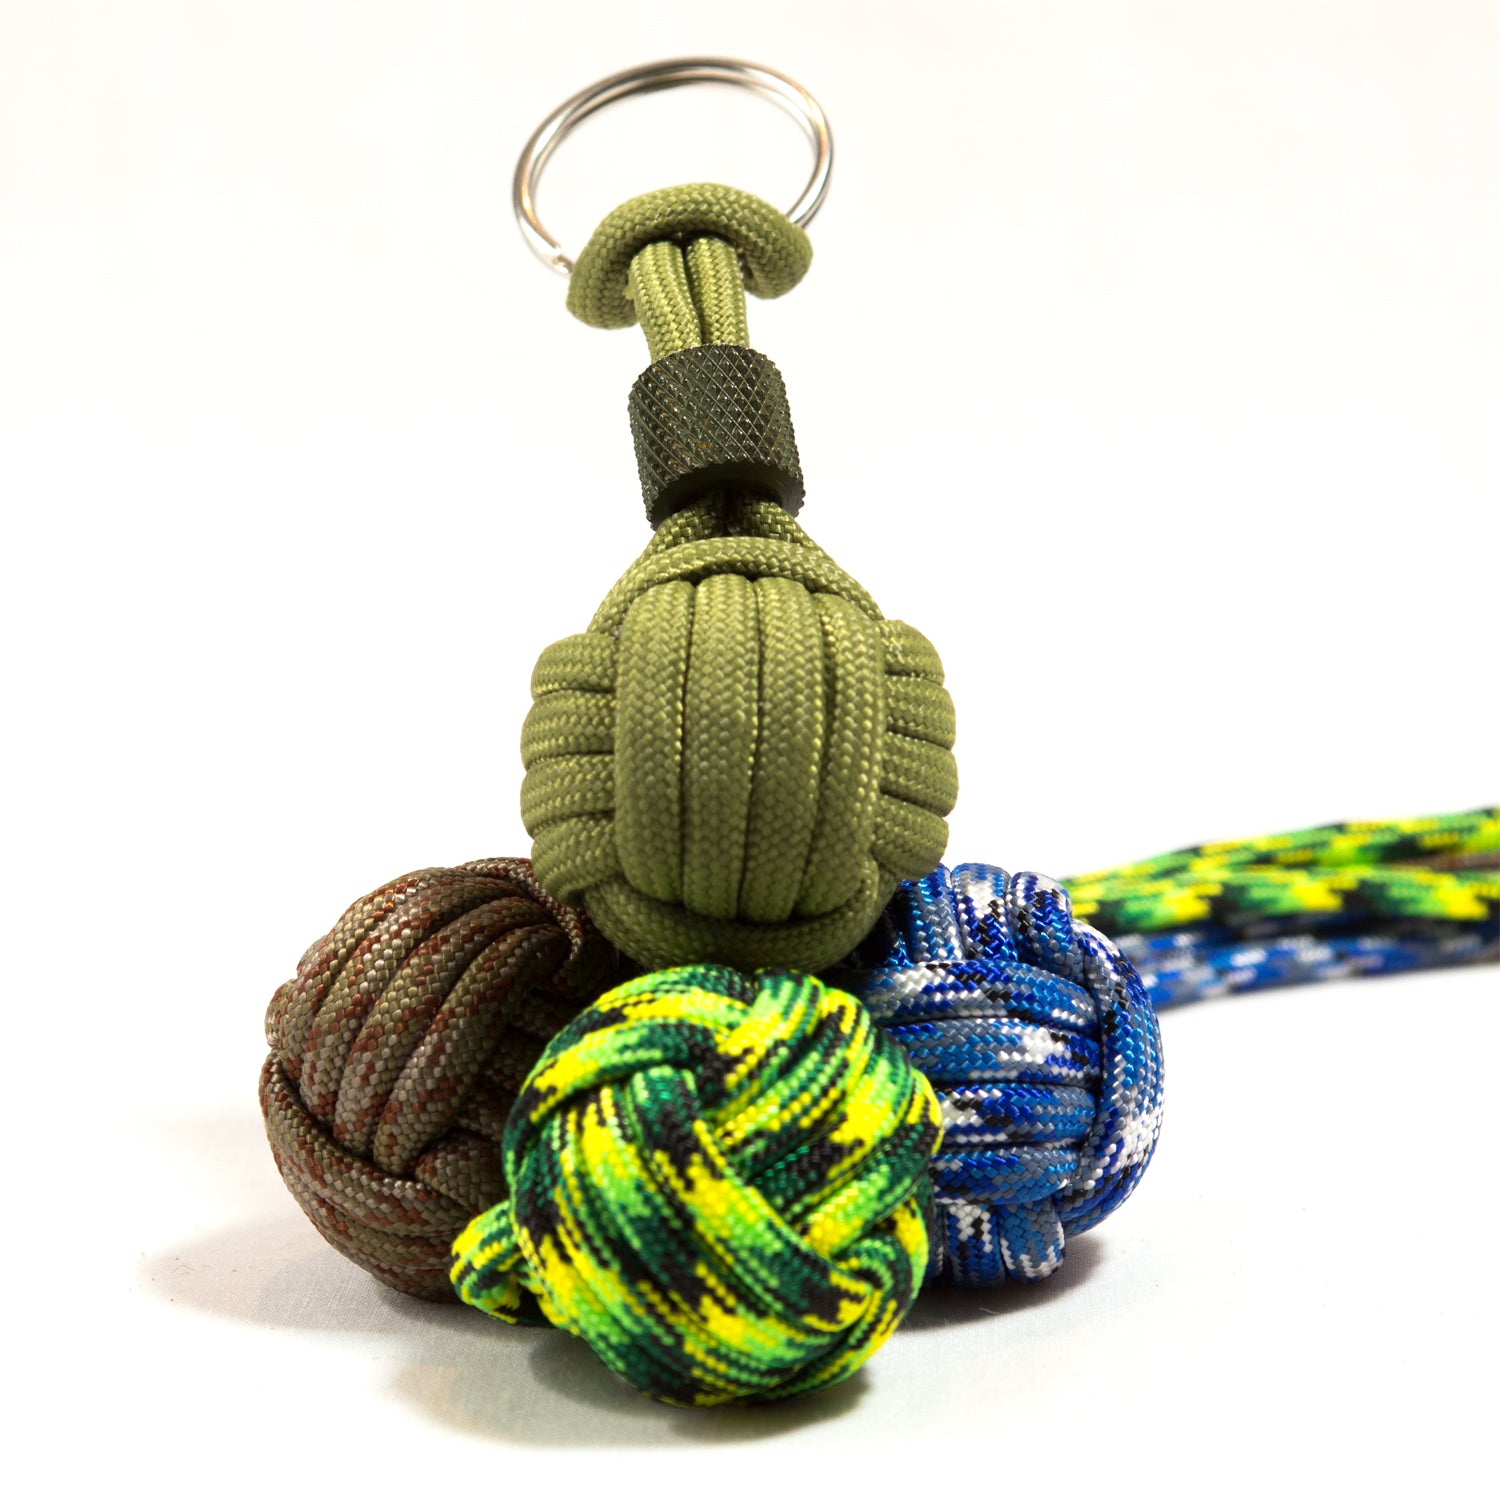 HERCULES Type III Paracord 550 Paracord Rope Parachute Cord